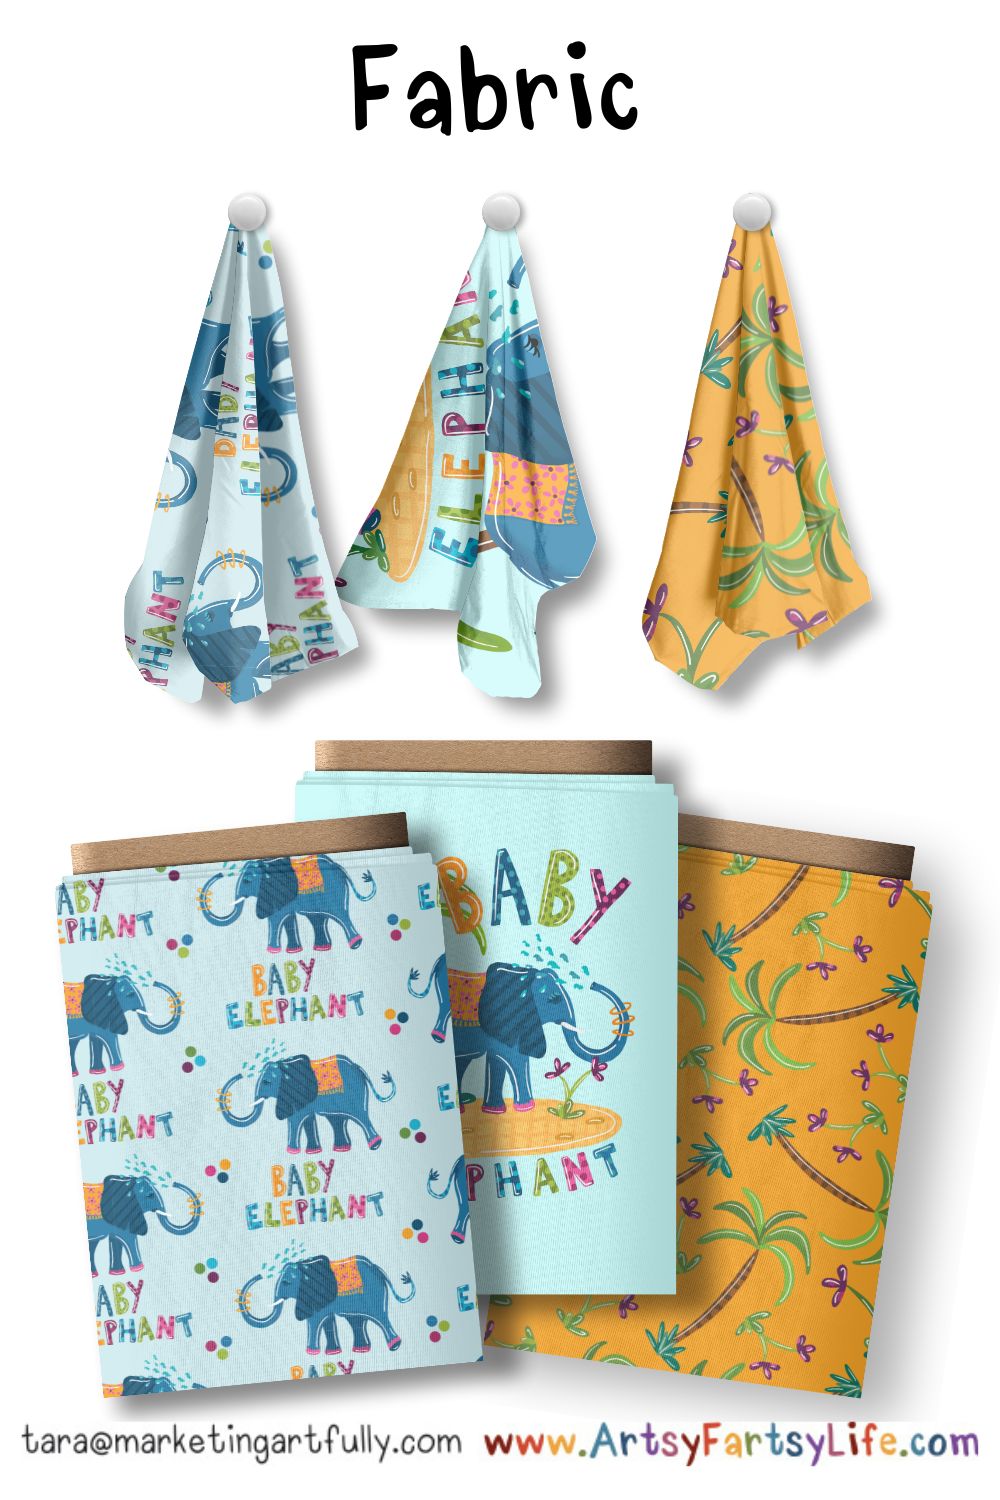 Baby Elephant Surface Design For Fabric